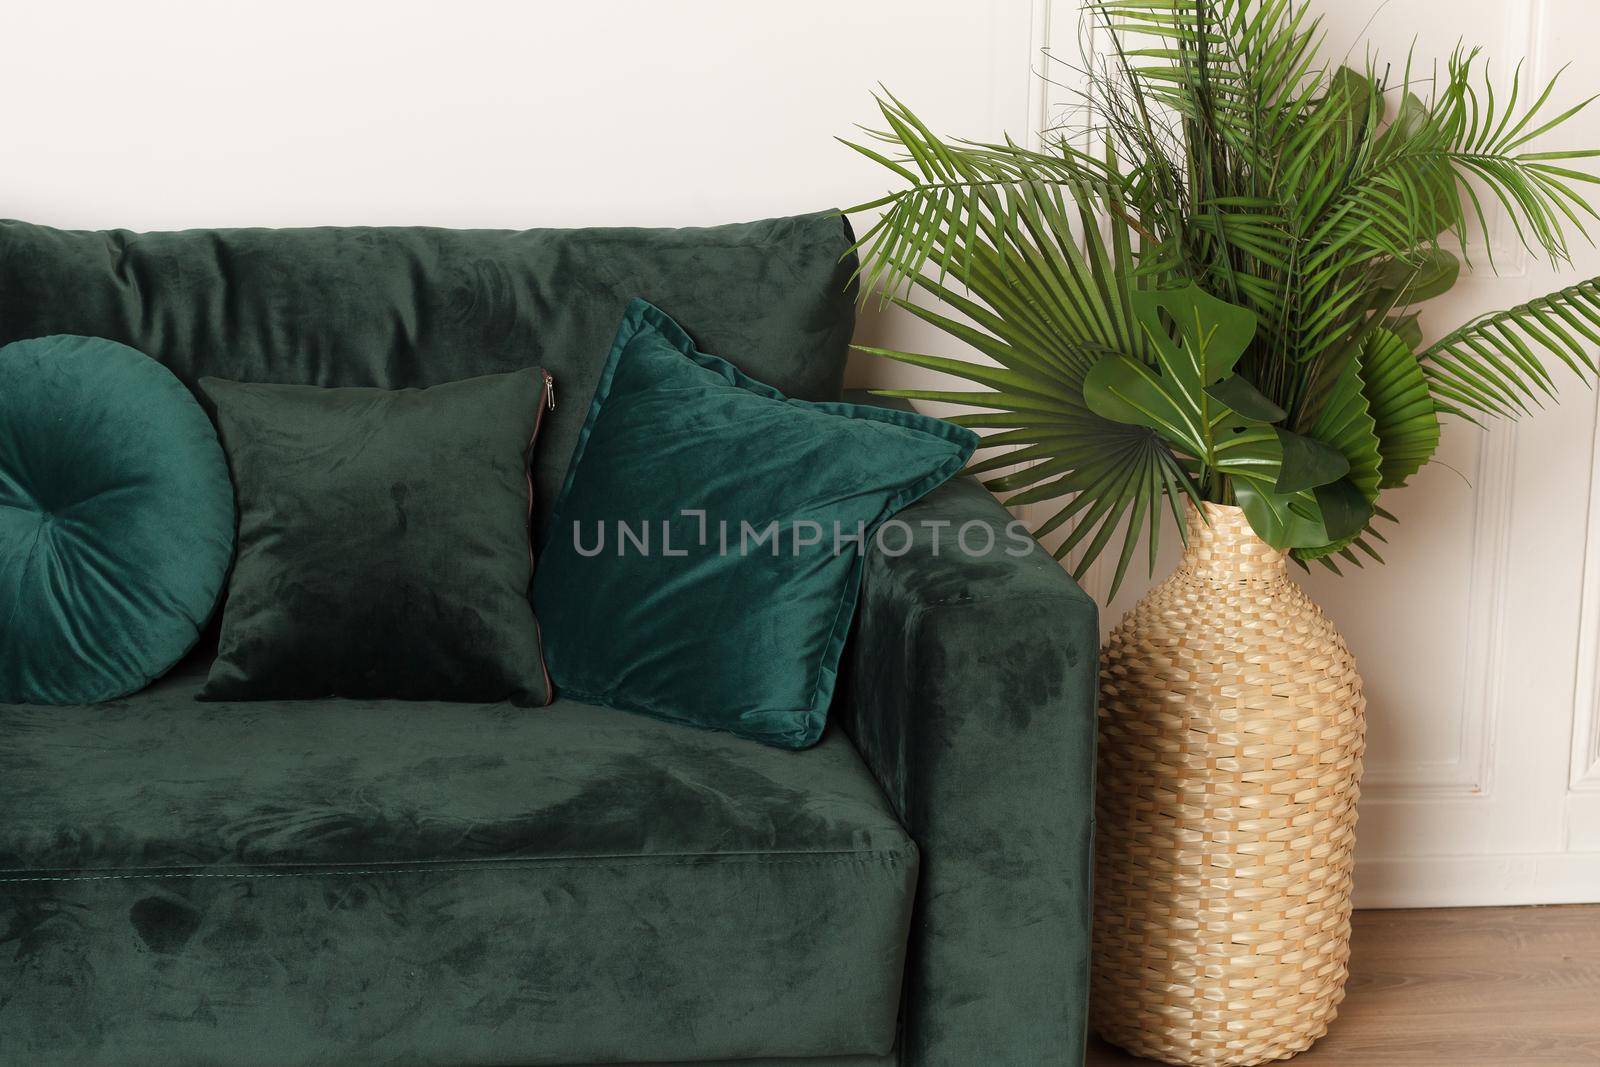 Luxurious green sofa with a plant in the interior